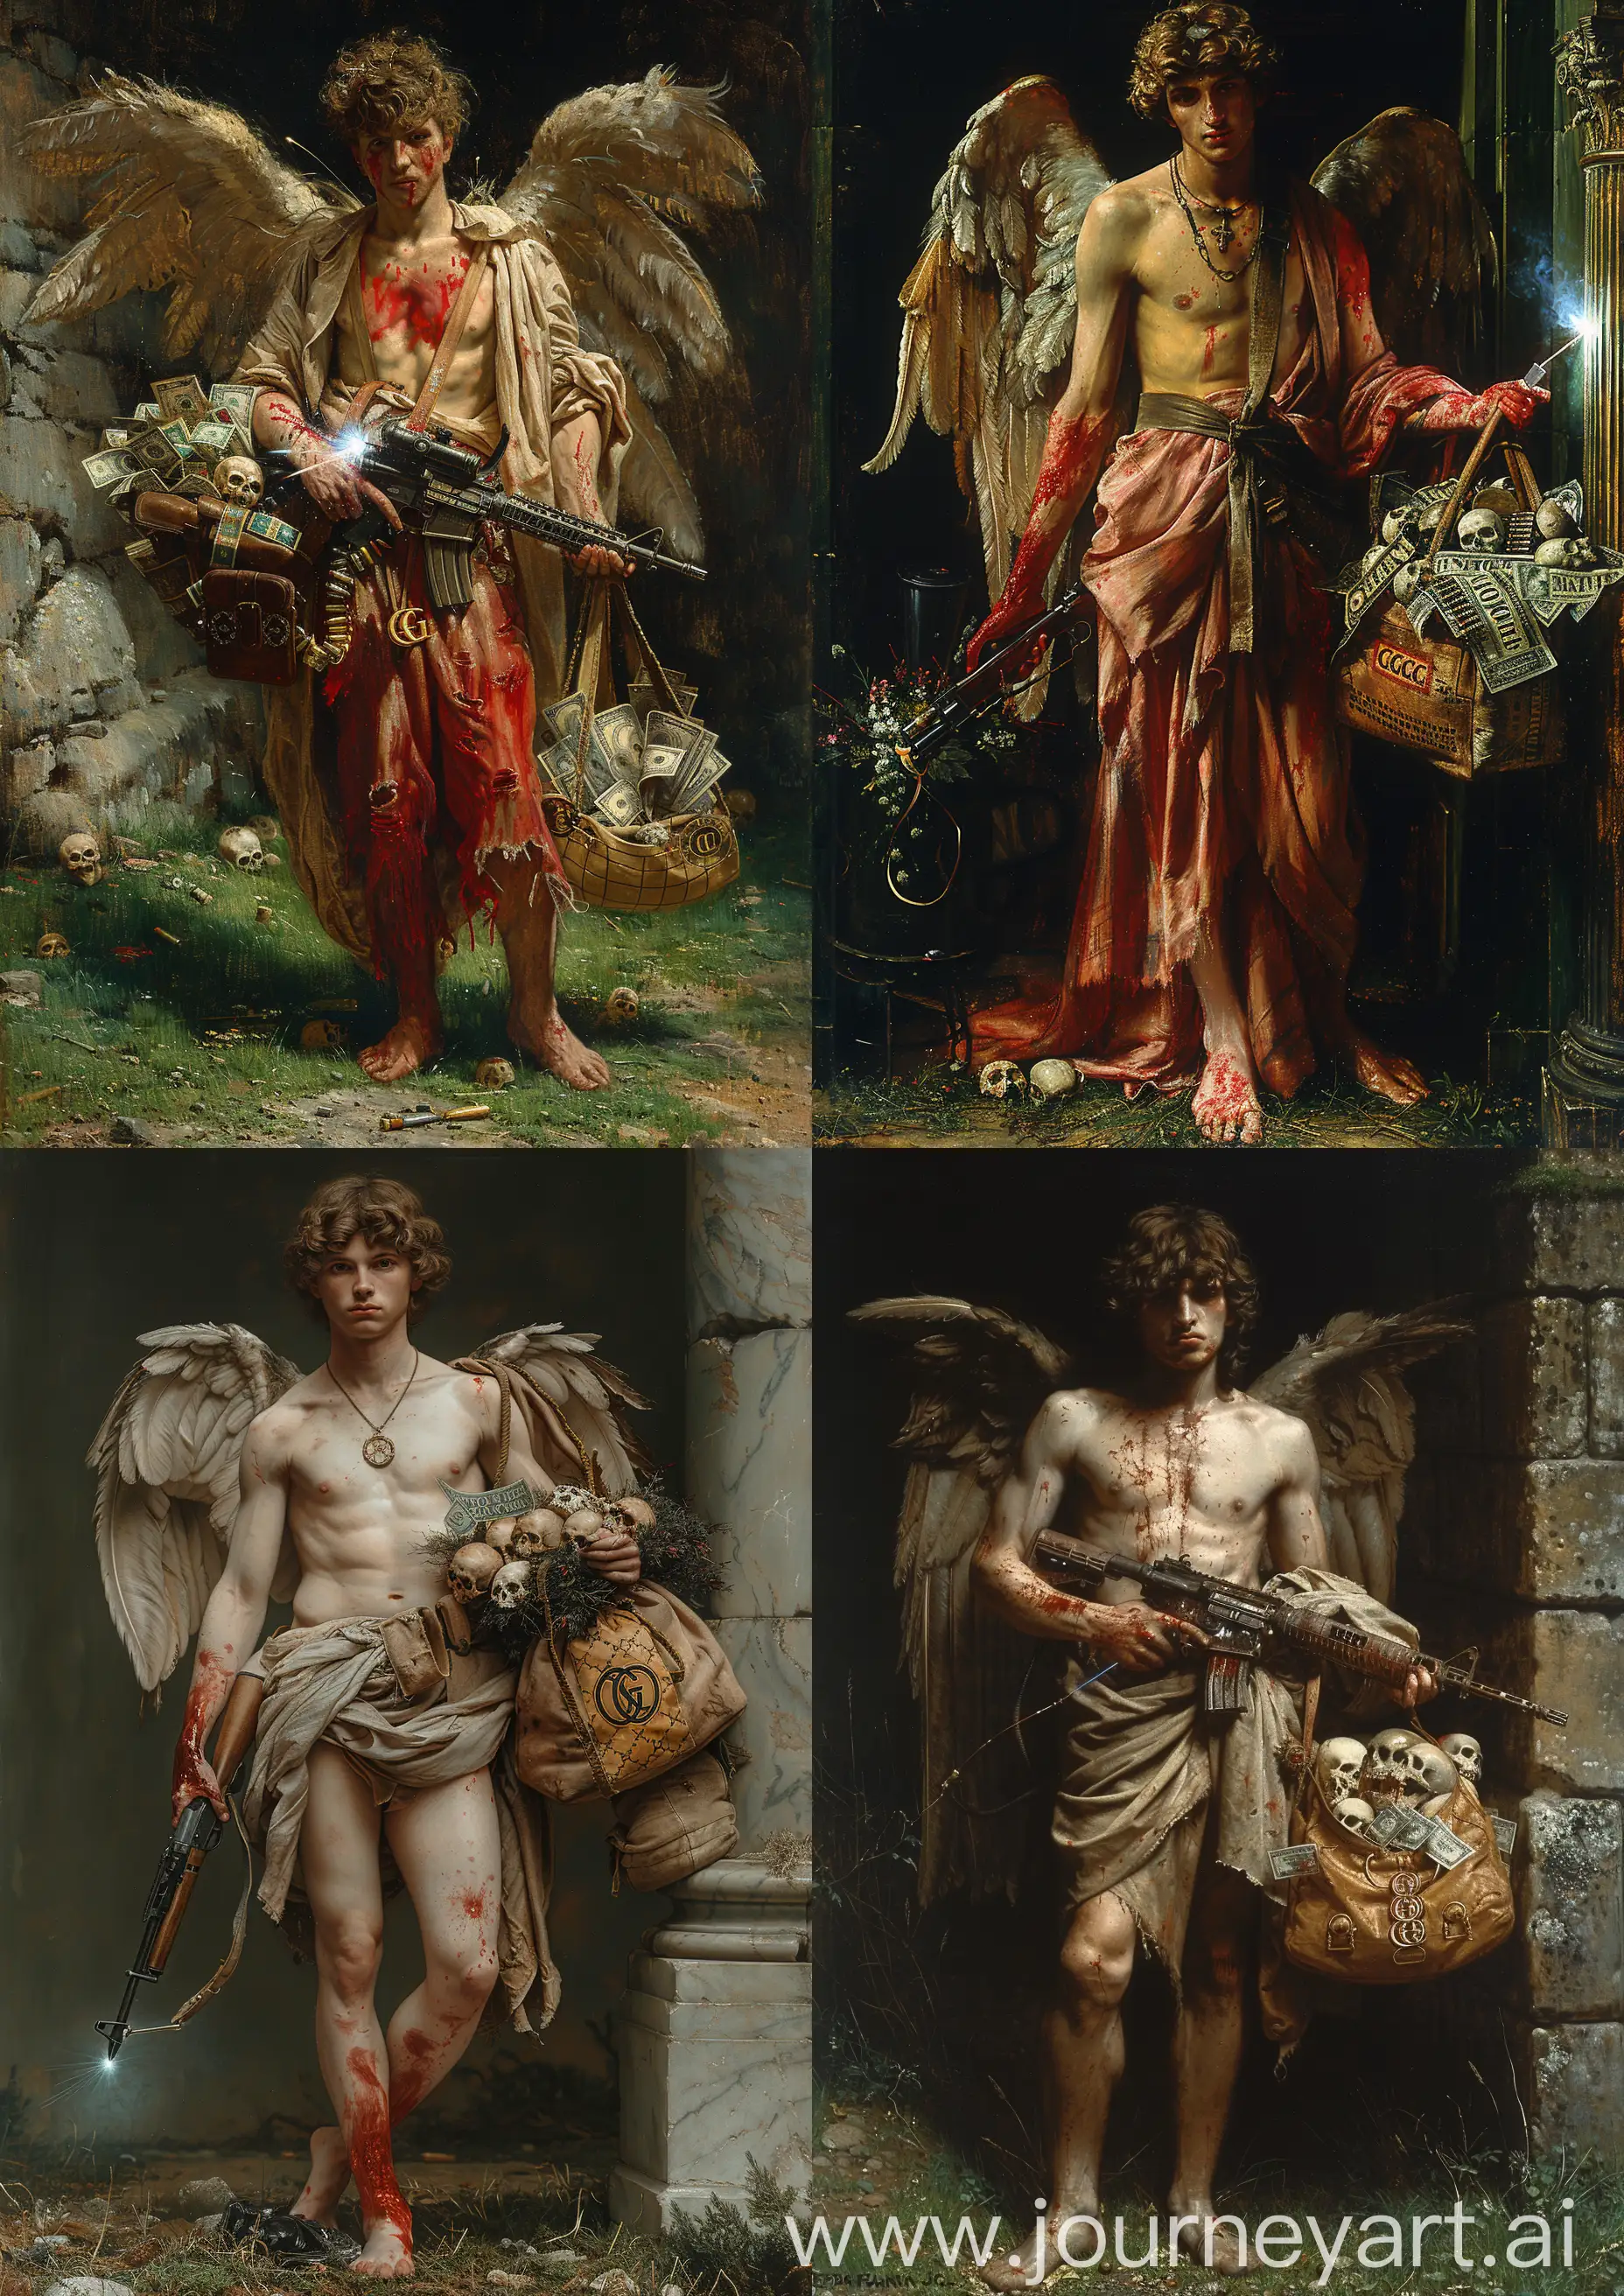 Male-Angel-Warrior-Holding-M16-and-Gucci-Bag-WarToned-Detailed-Art